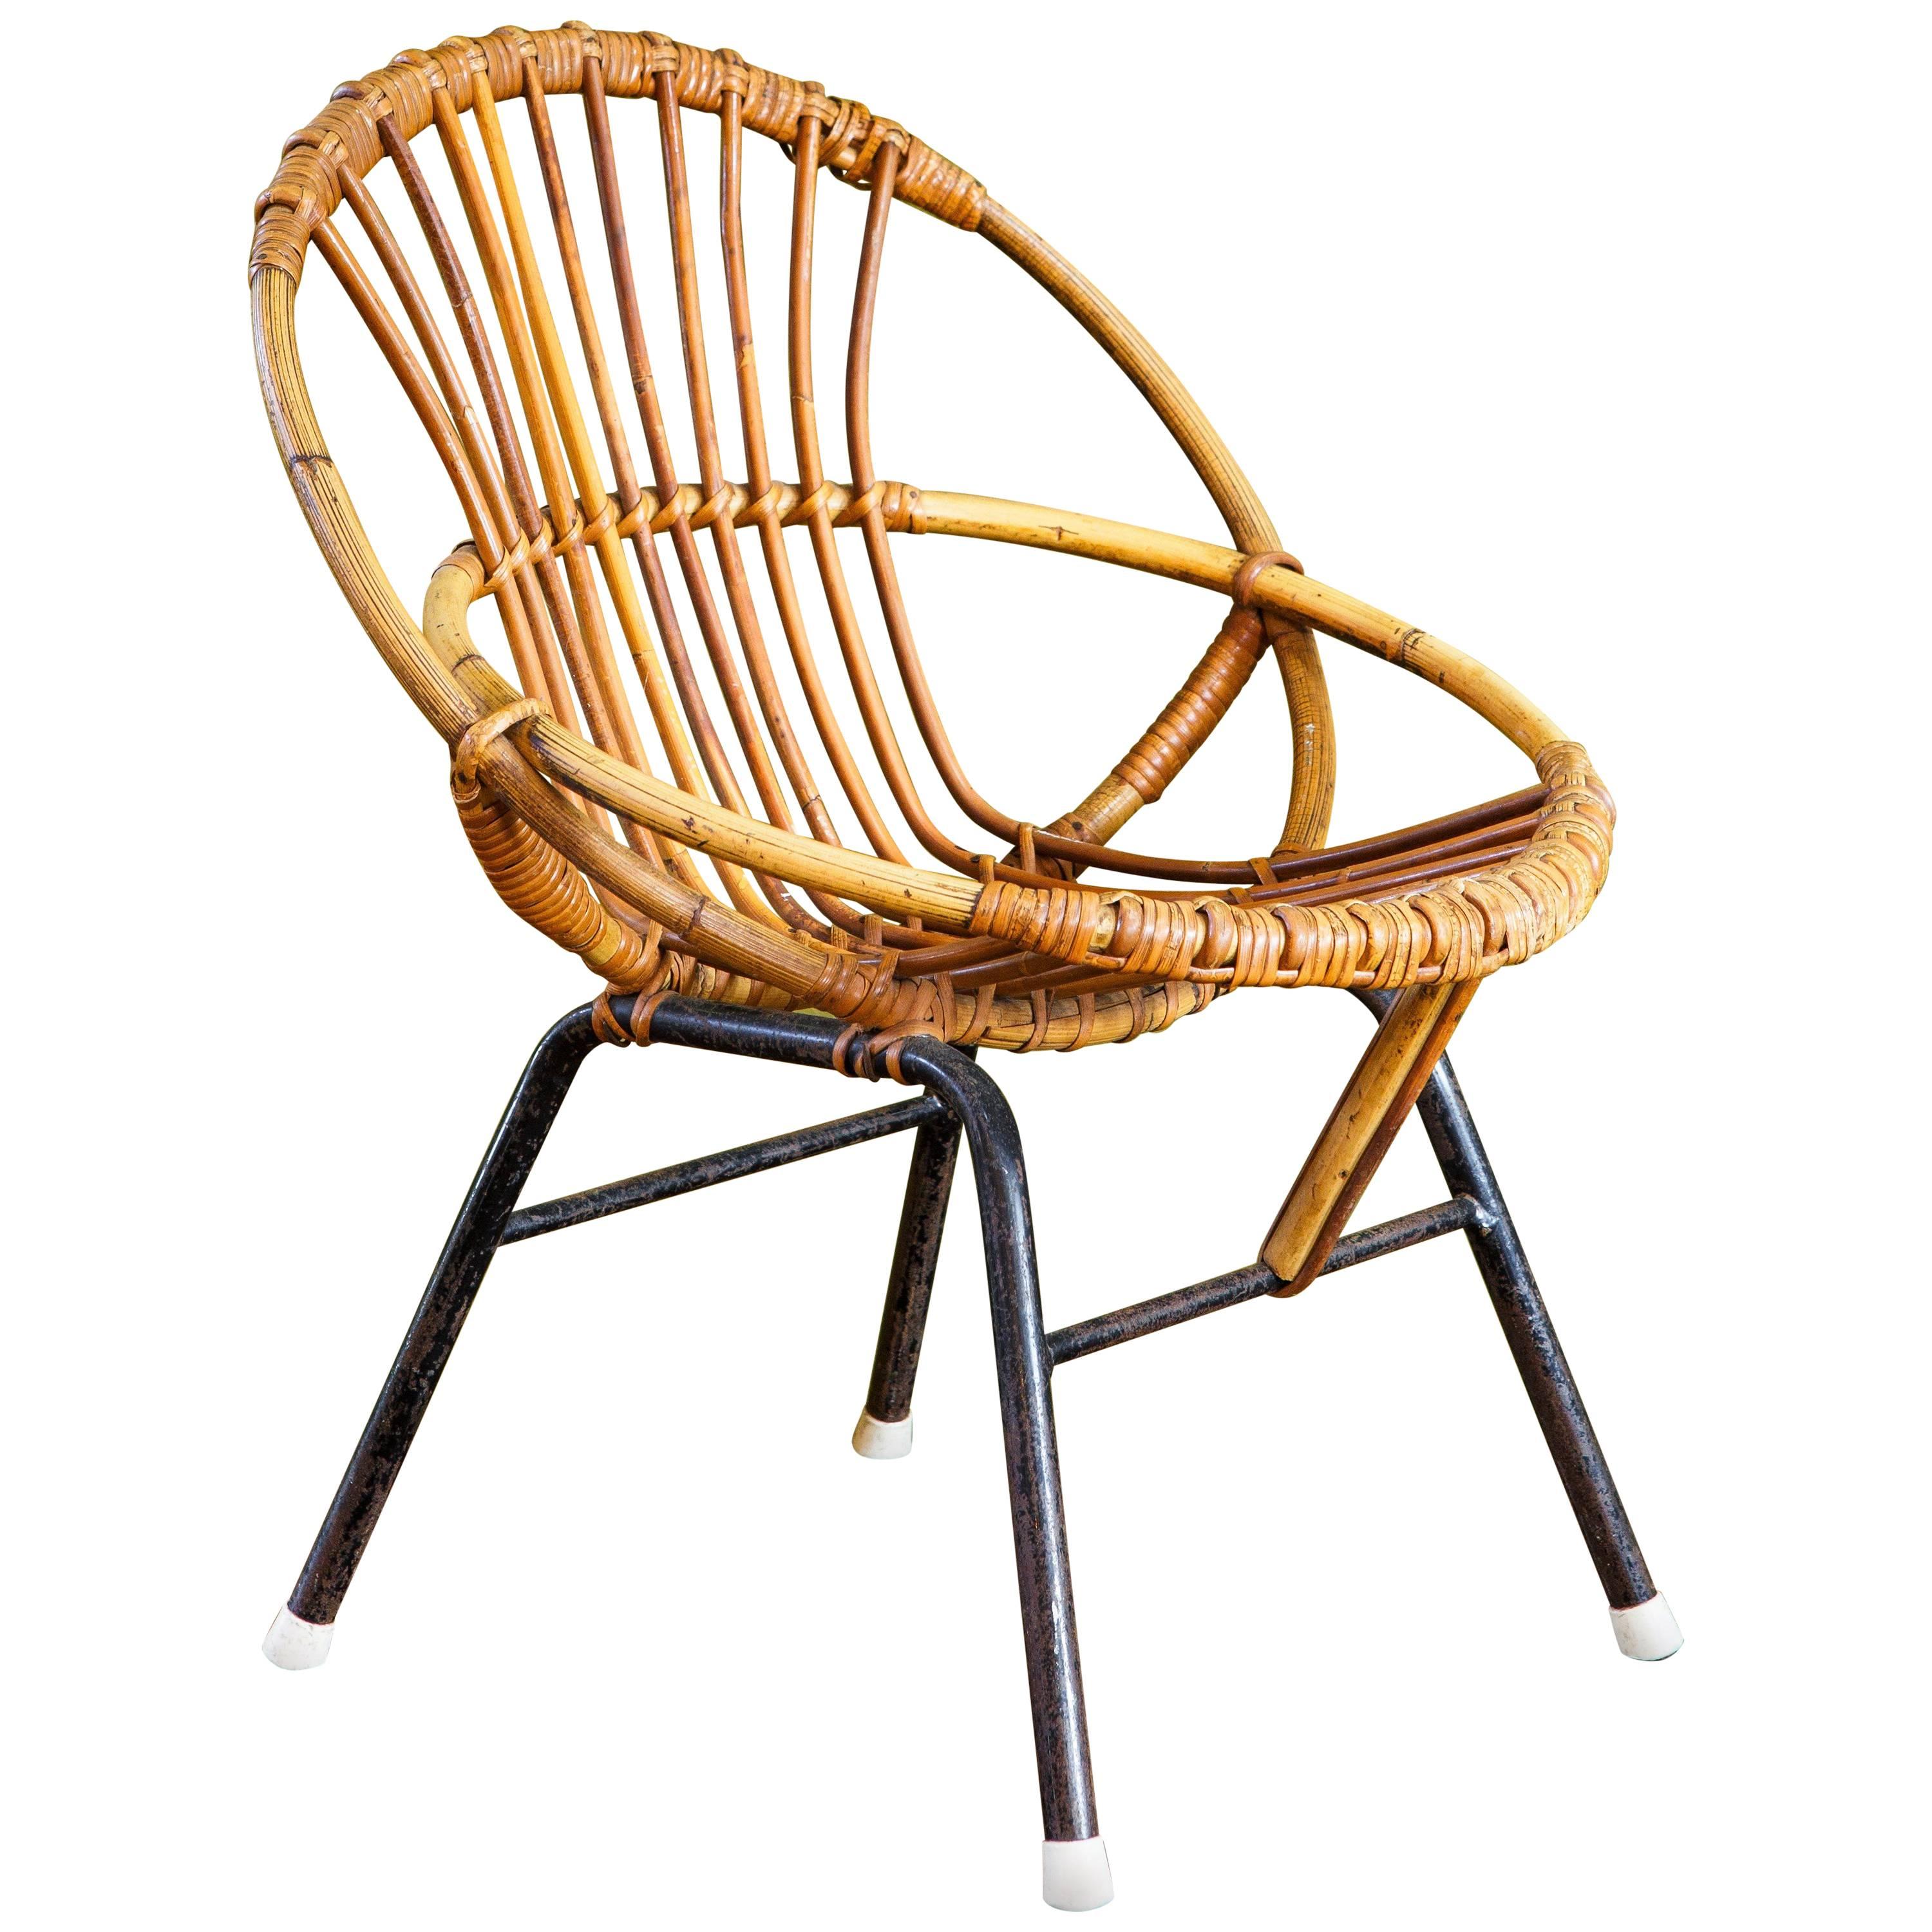 Bamboo/Rattan with Metal Legs Child's Chair by Rohe Noordwolde